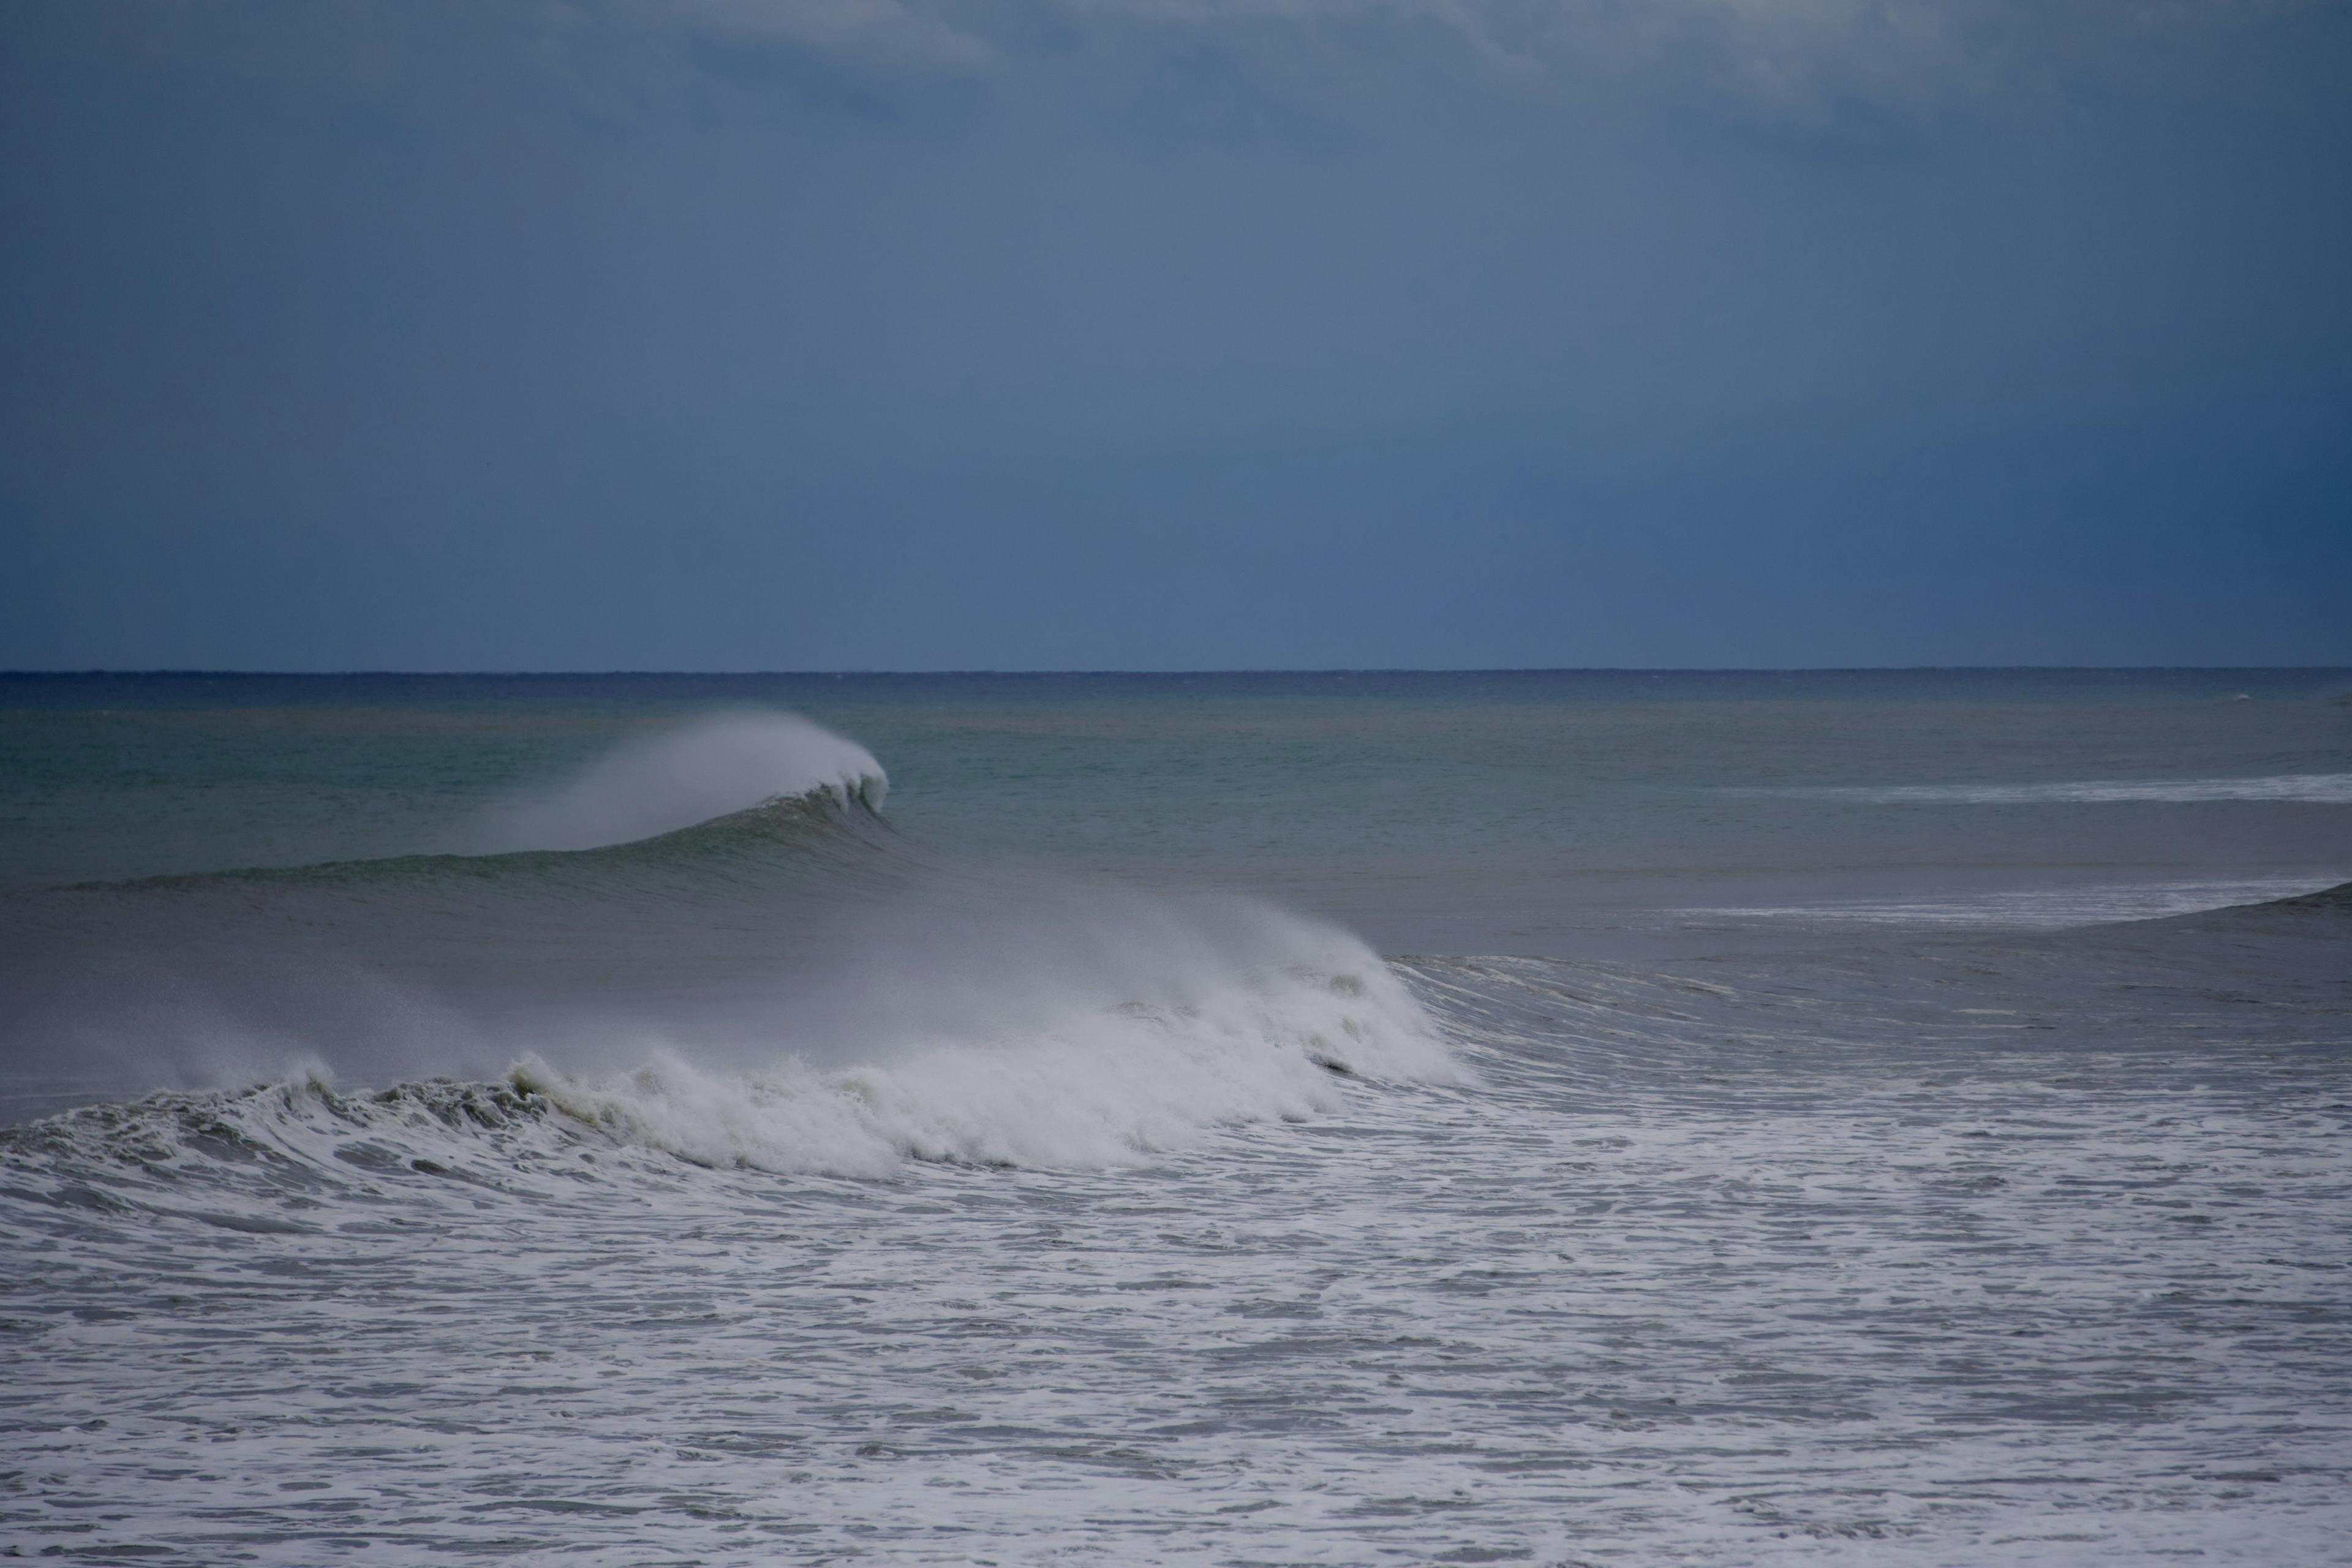 Taiwan's West Coast has been pumping